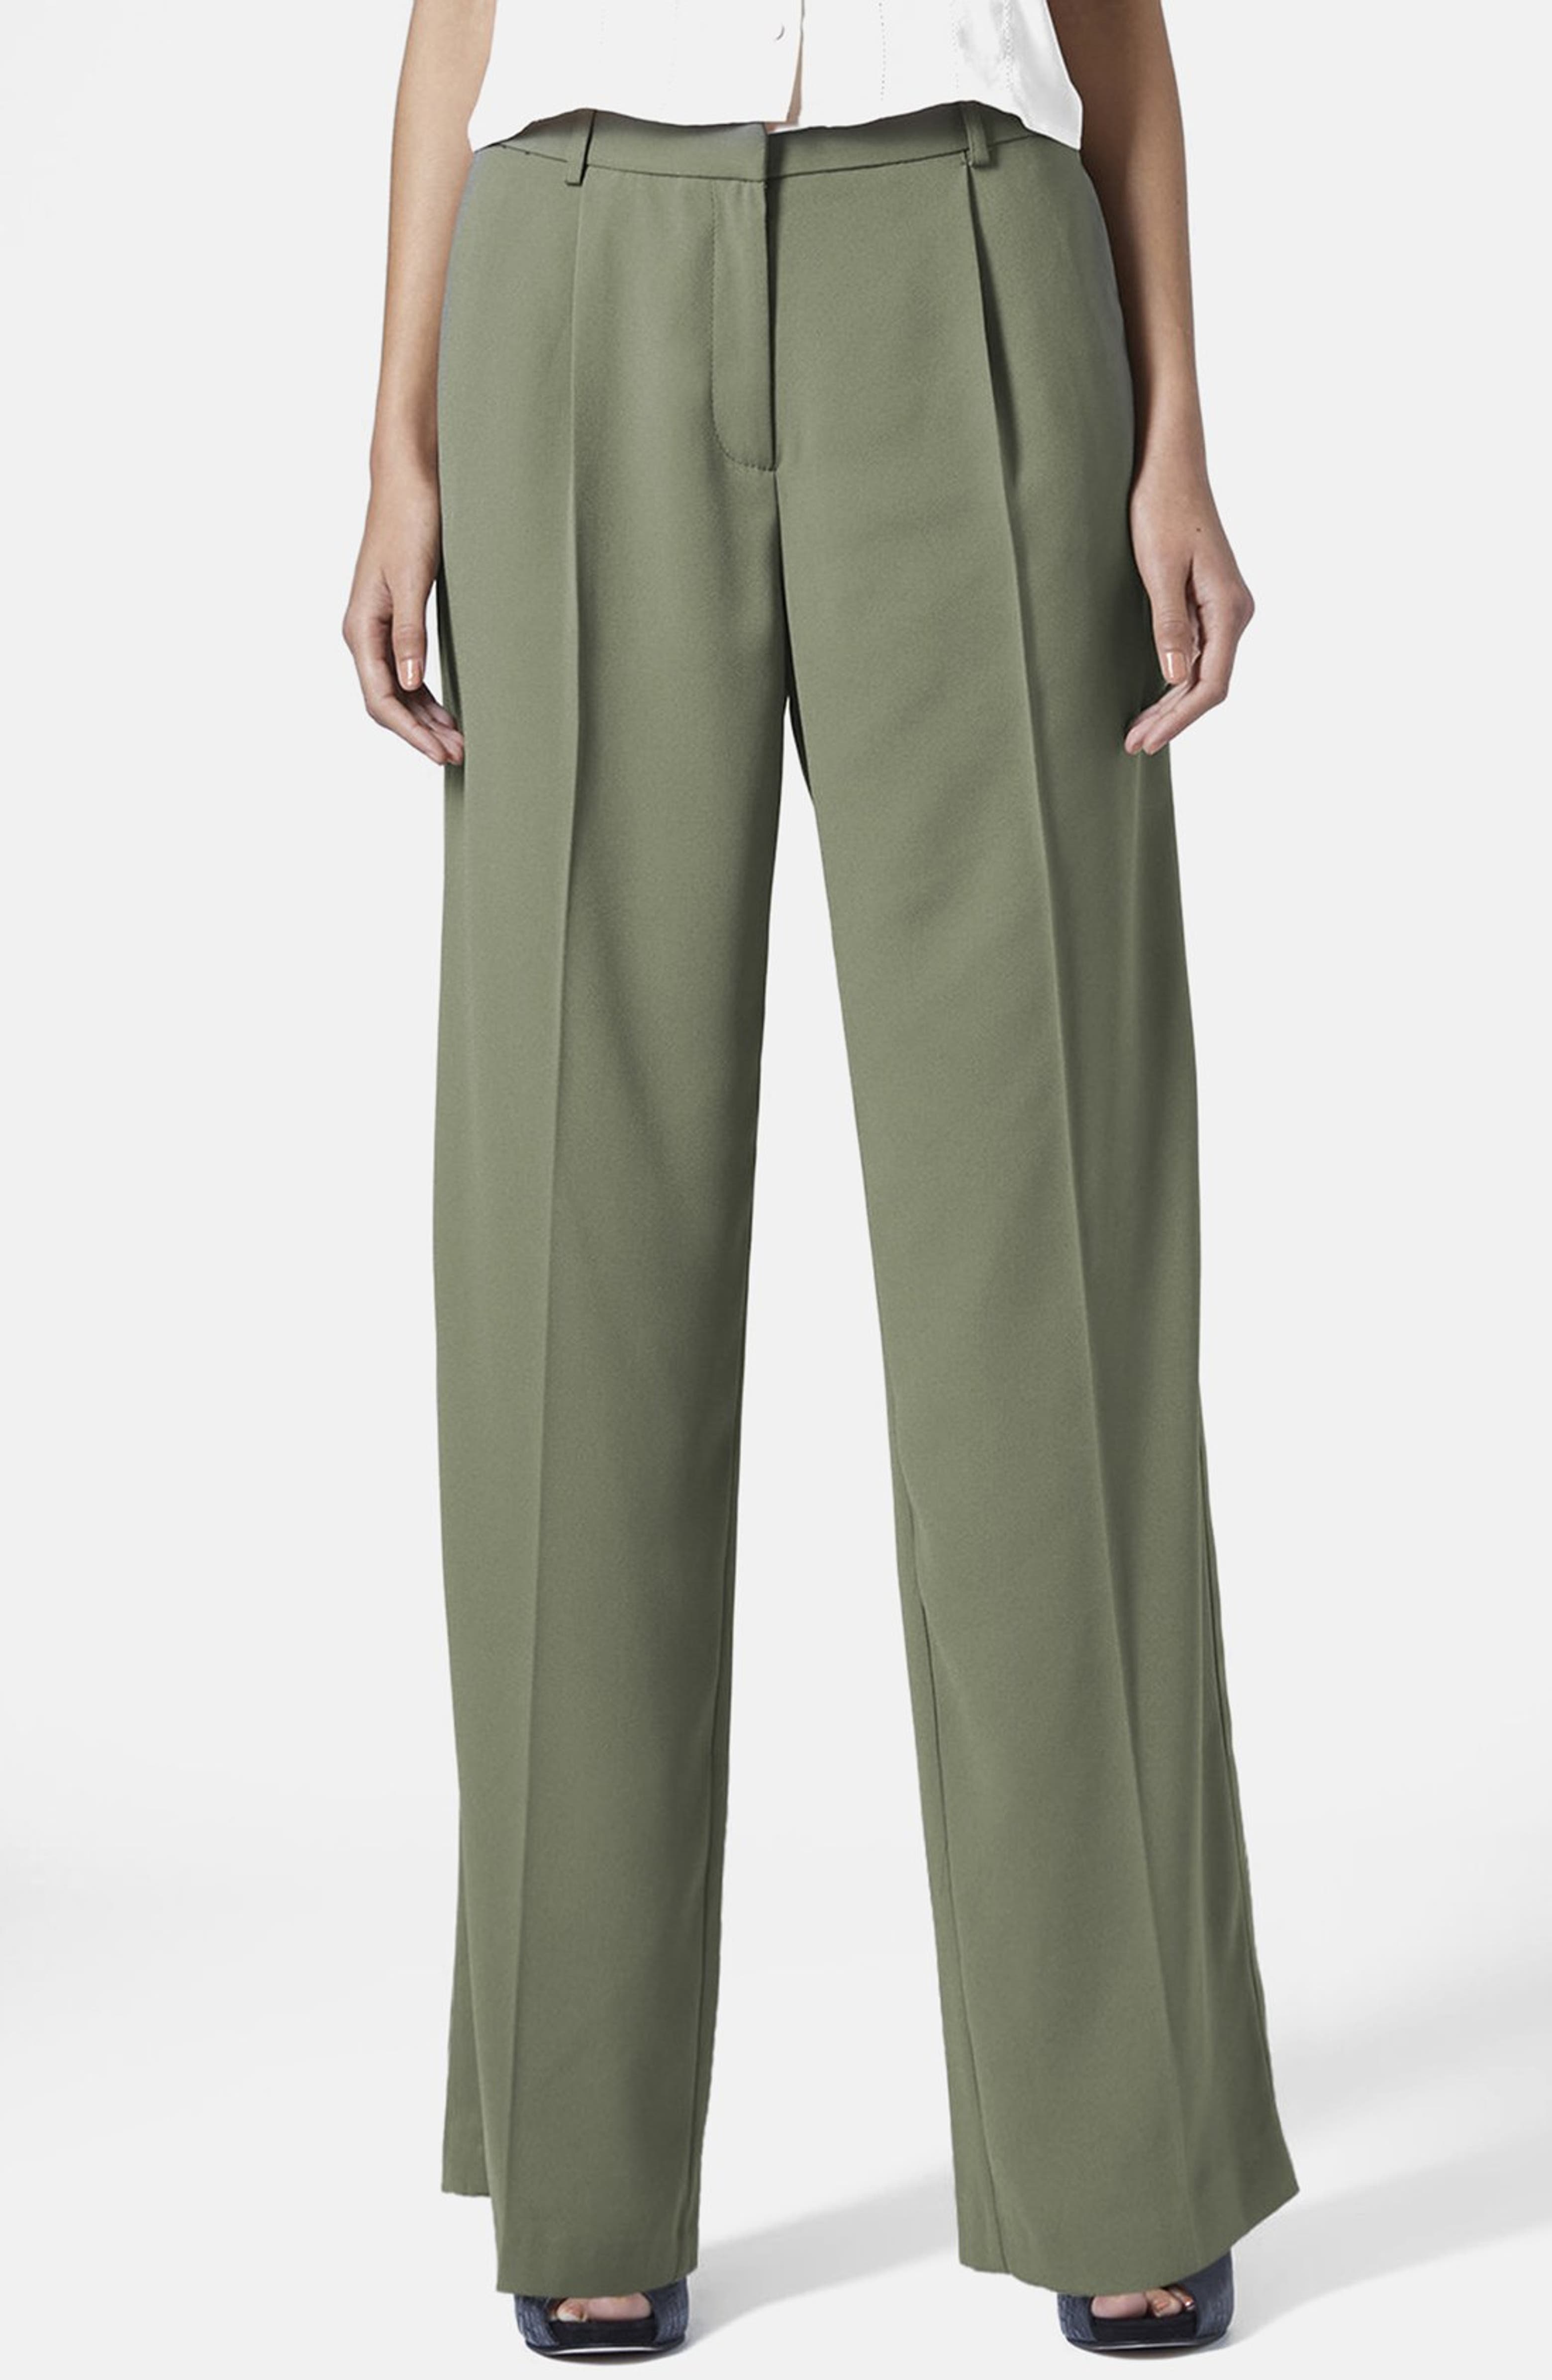 Topshop Slouchy Trousers | Nordstrom